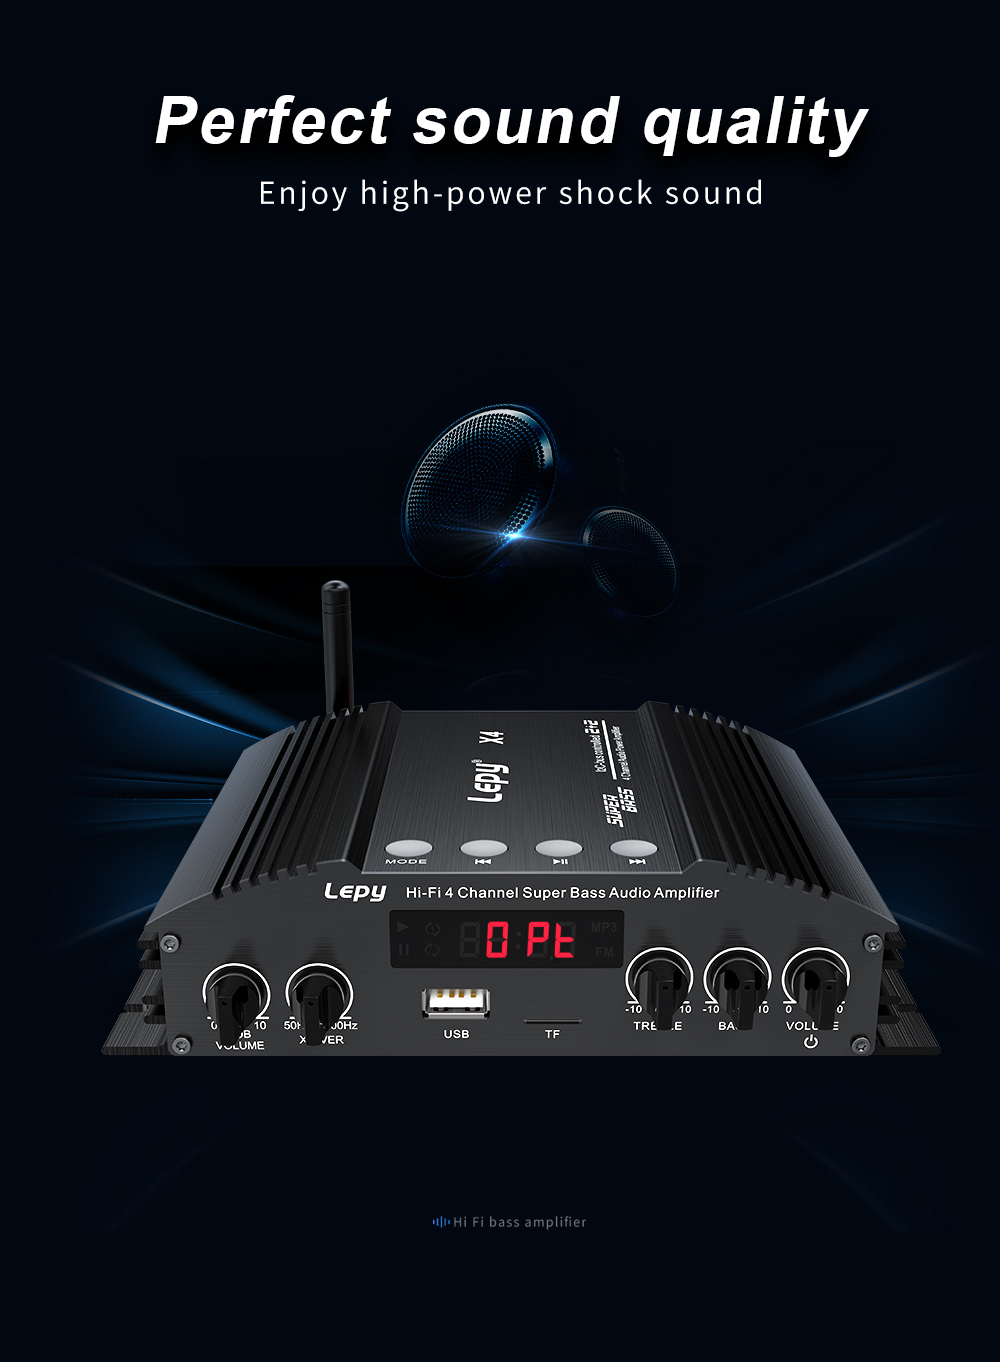 LEPY X4 bluetooth 5.0 Digital HiFi Power Amplifier 60W×4 Amplificador 2.1 Stereo Dual Subwoofer AMP Home Theater Car Audio 4CH USB TF with Antenna